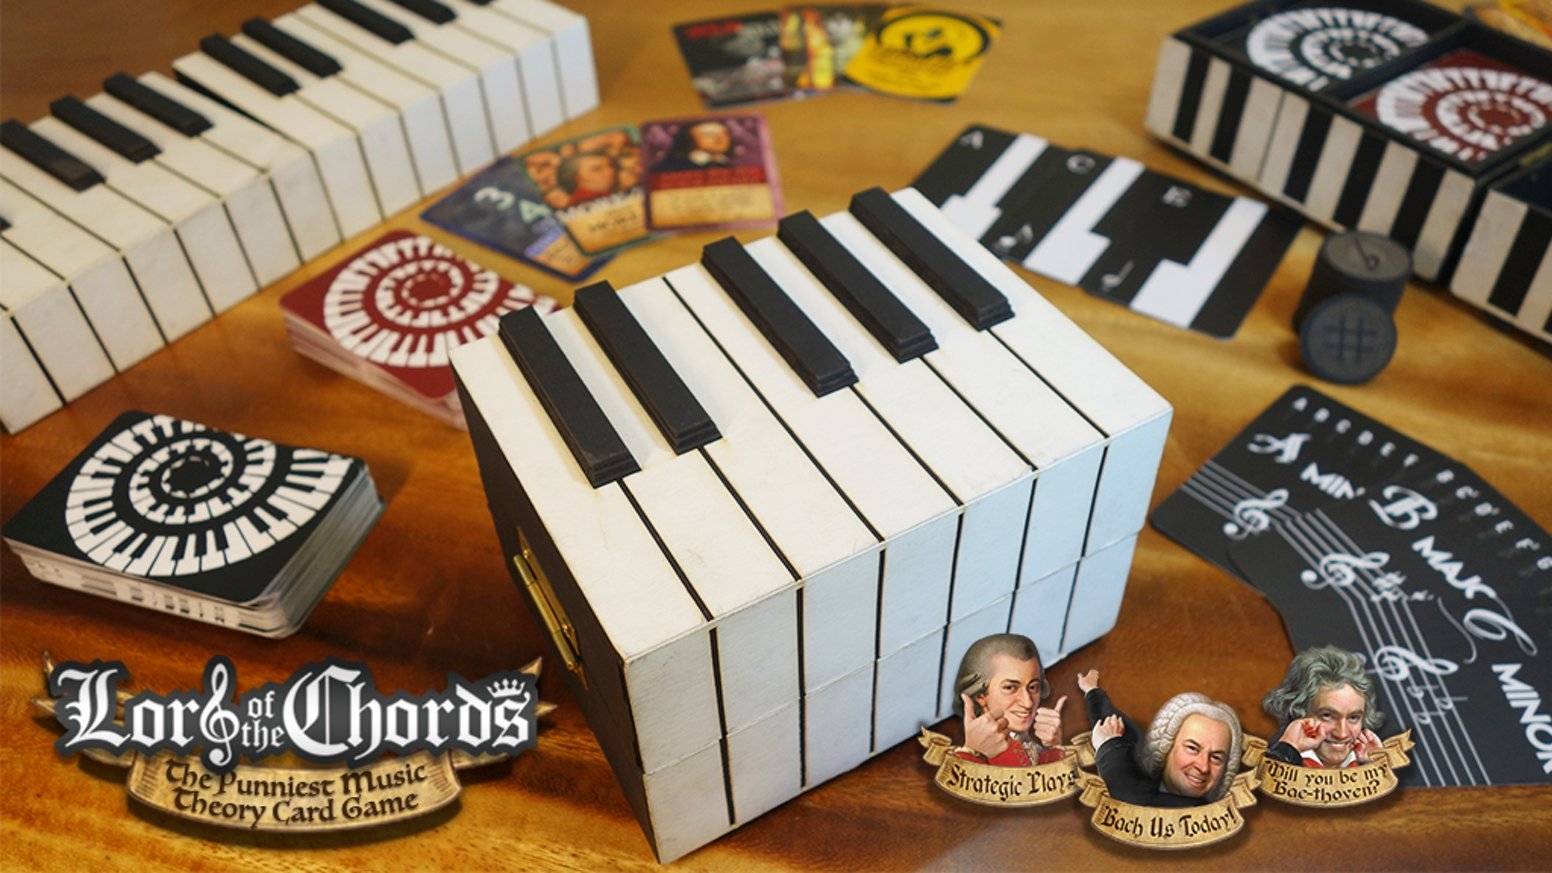 100% FUNDED IN 75 MINUTES! - Lord of the Chords